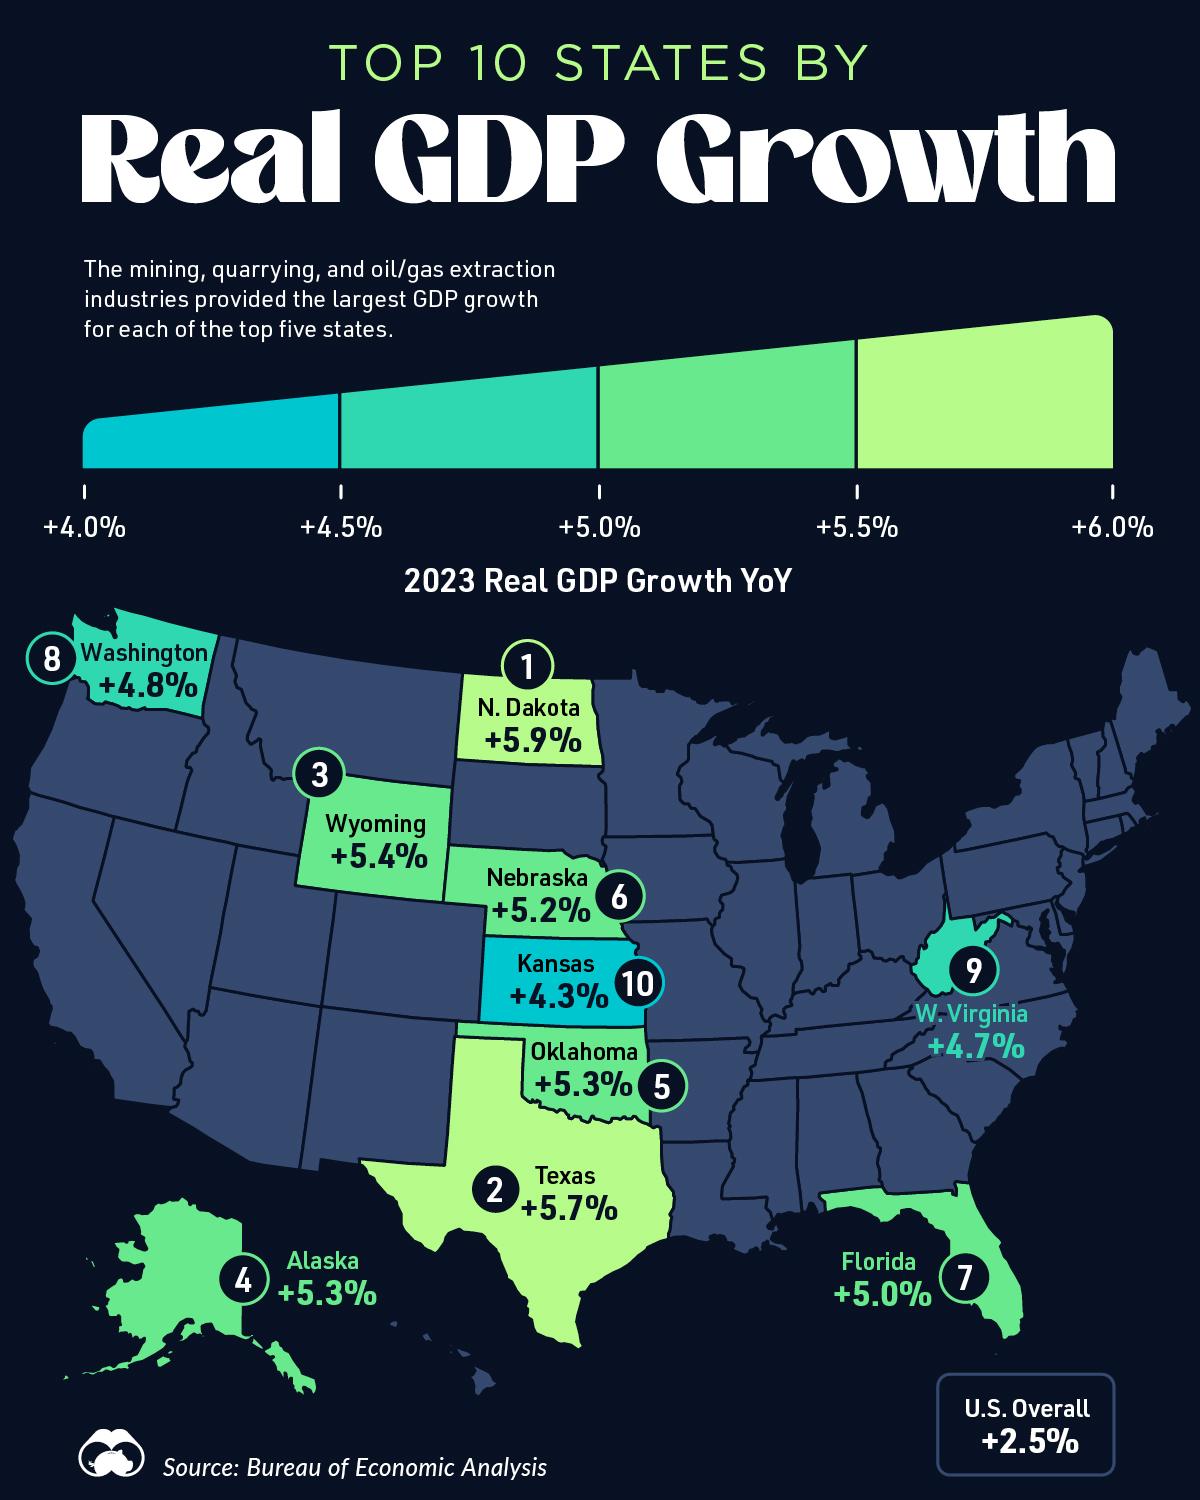 U.S. States with the Highest Real GDP Growth in 2023